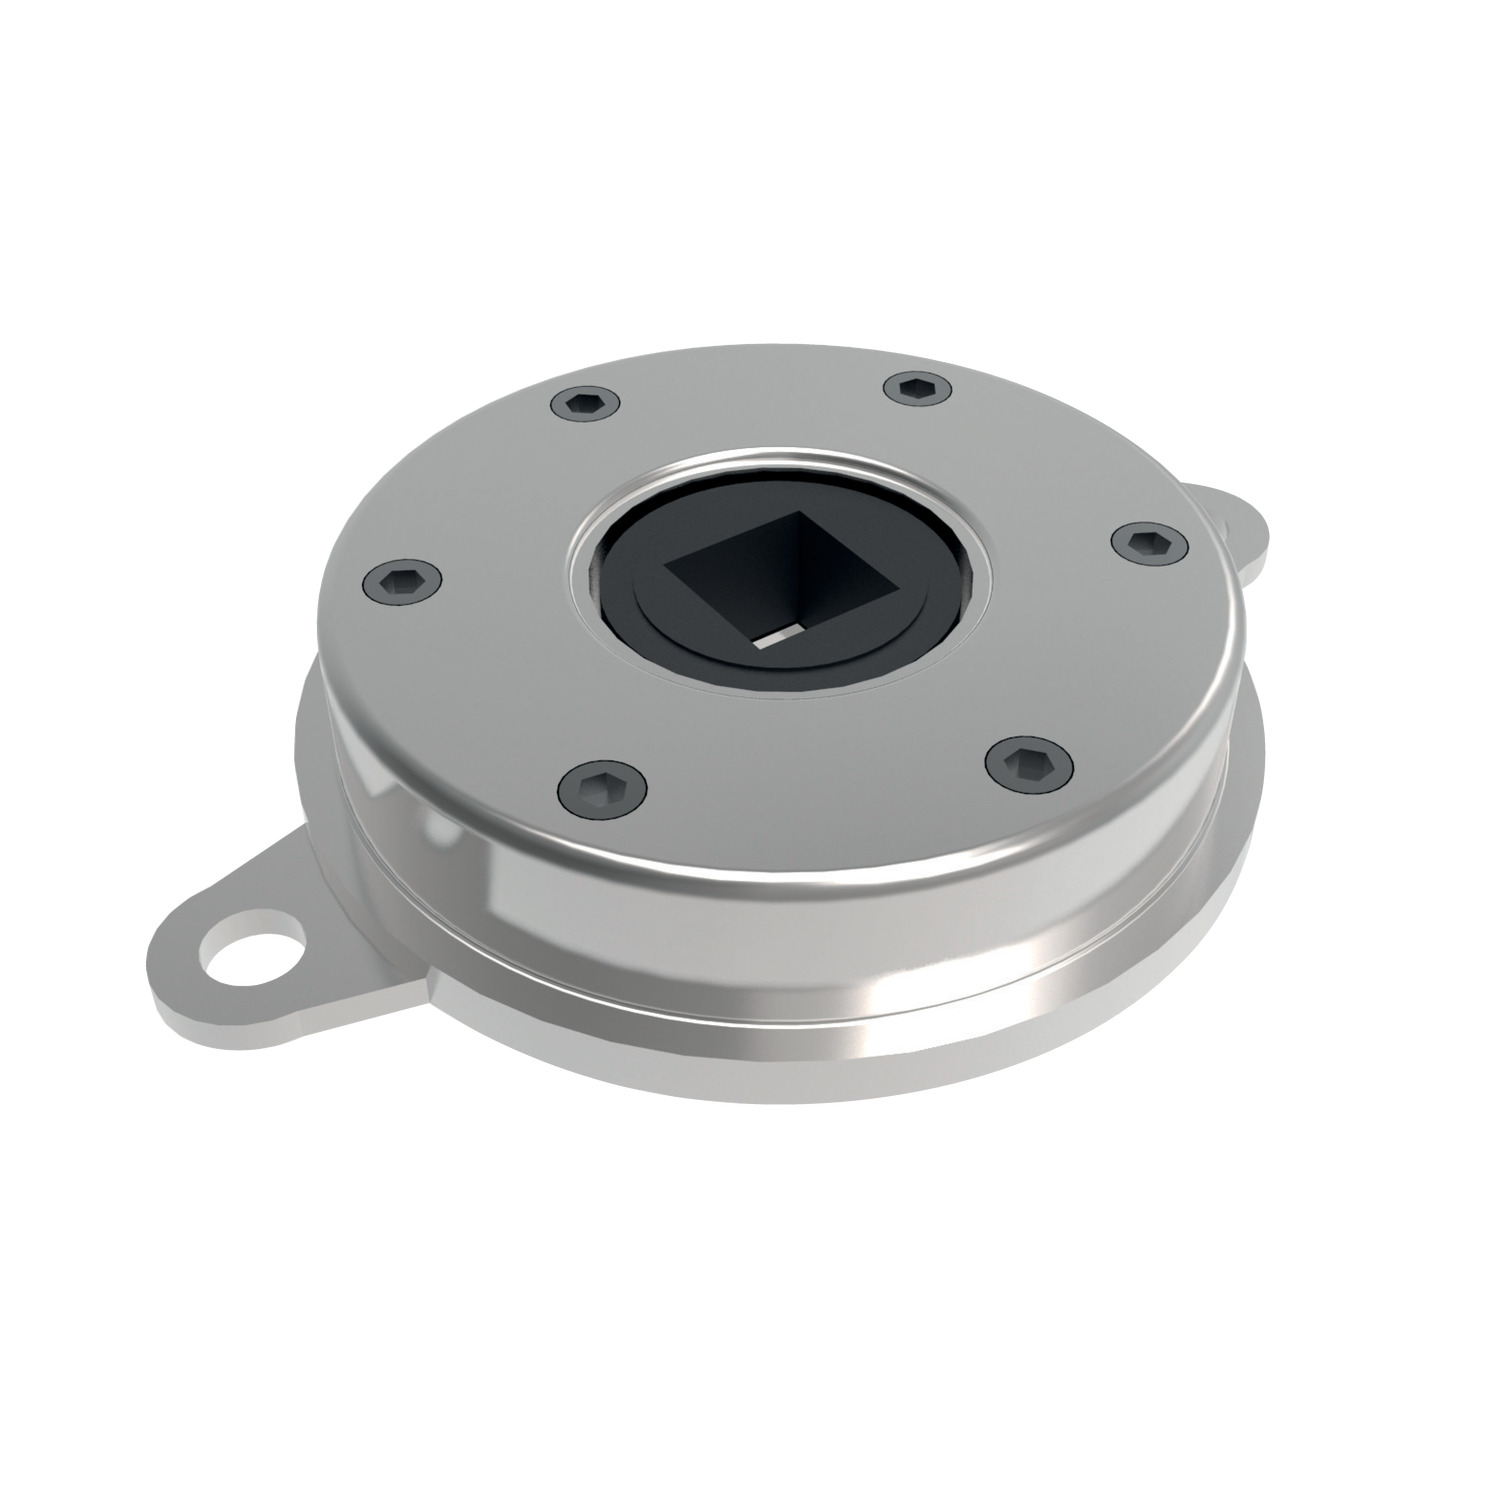 Product Q3220, Disk Dampers bi-directional - continuous rotation - up to 87 Kgf.cm / 